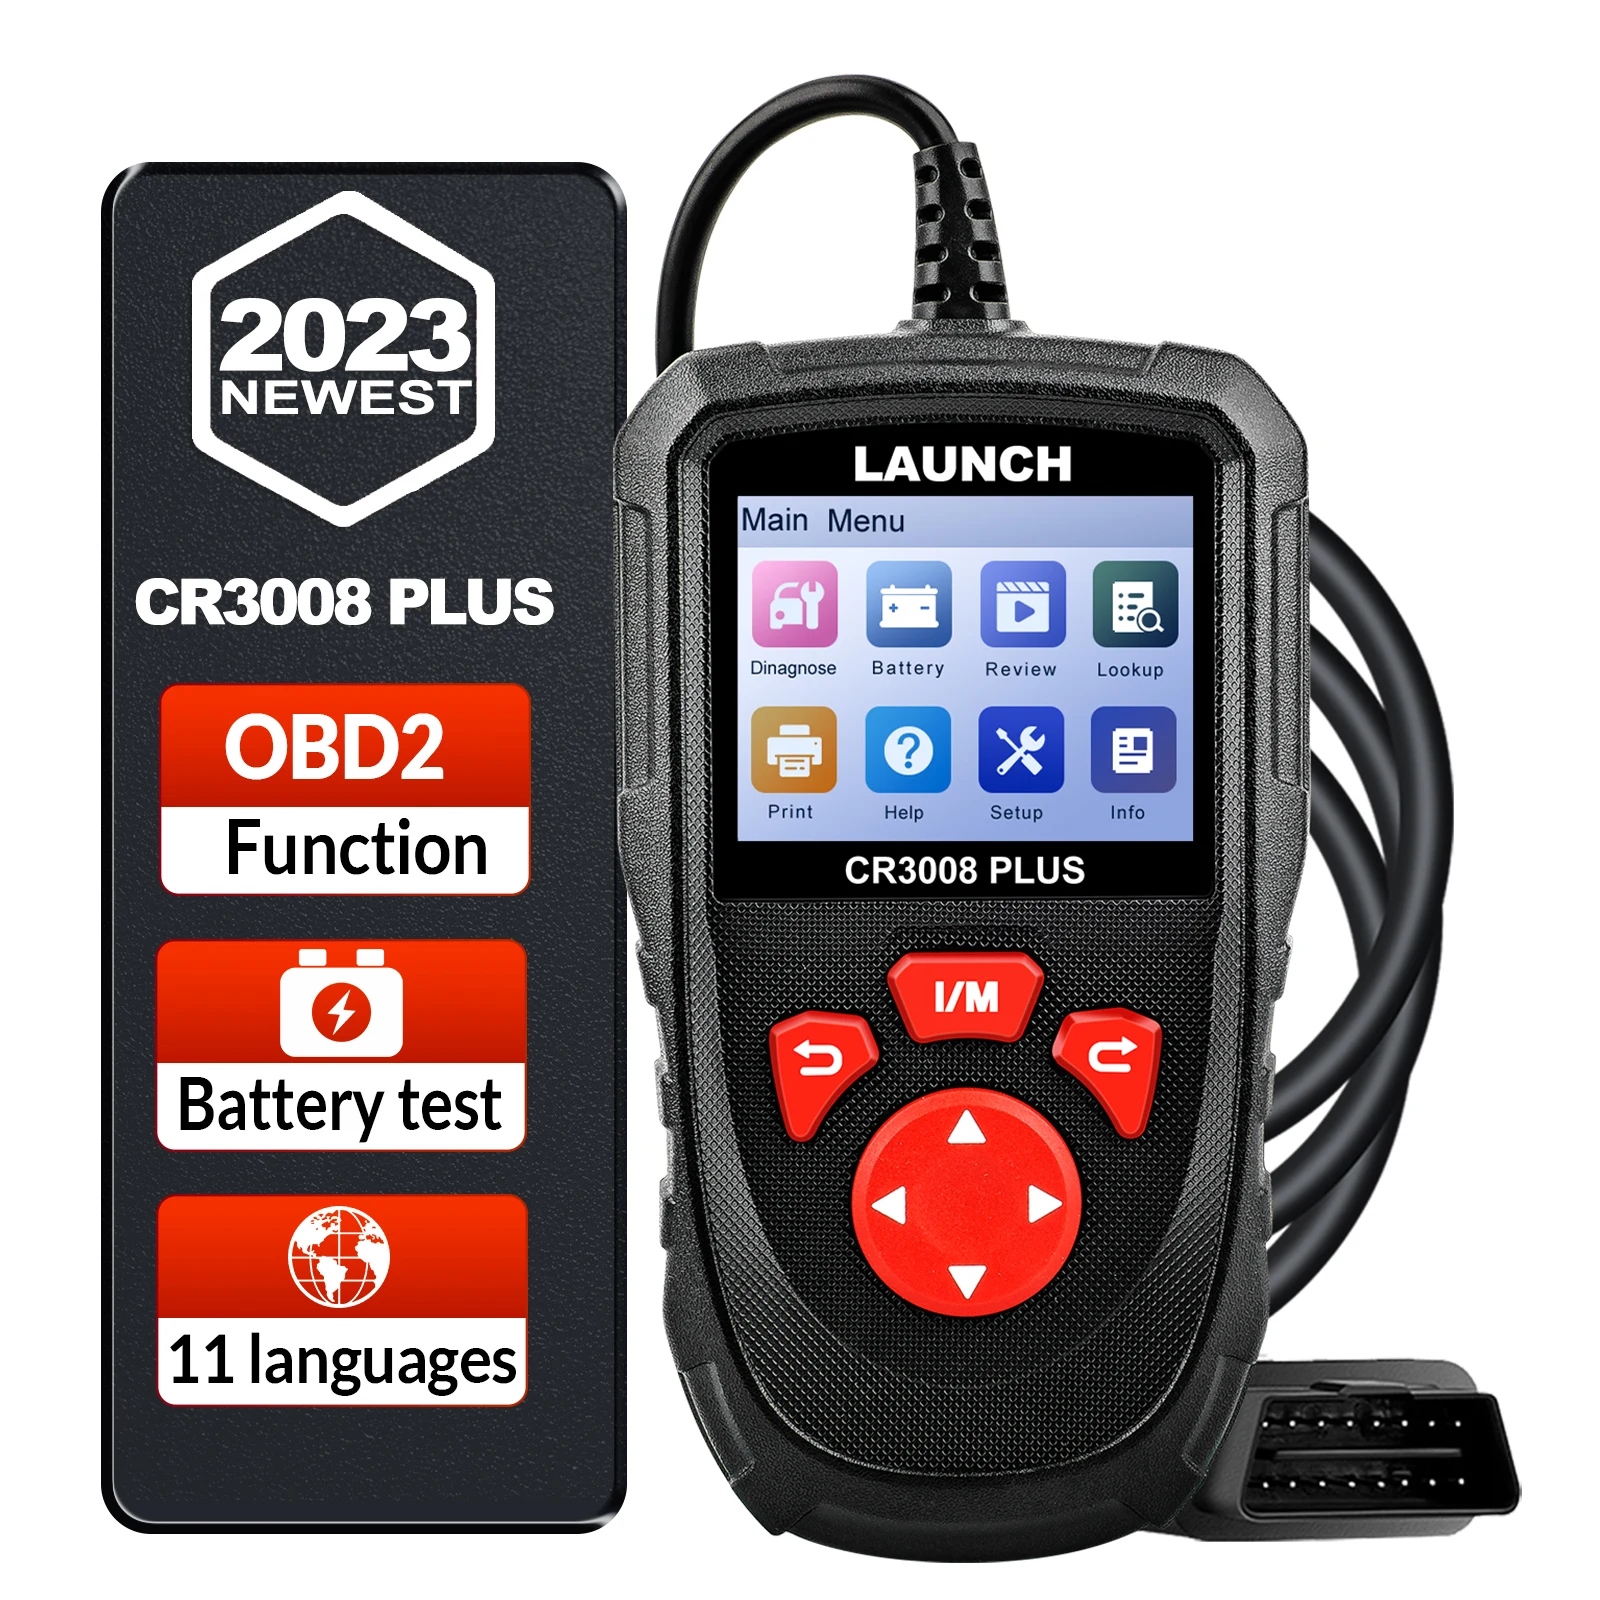 

New Arrival LAUNCH Creader 3008 Plus Scanner support full obd2 Battery tester function CR3008 OBDII code reader diagnostic tool